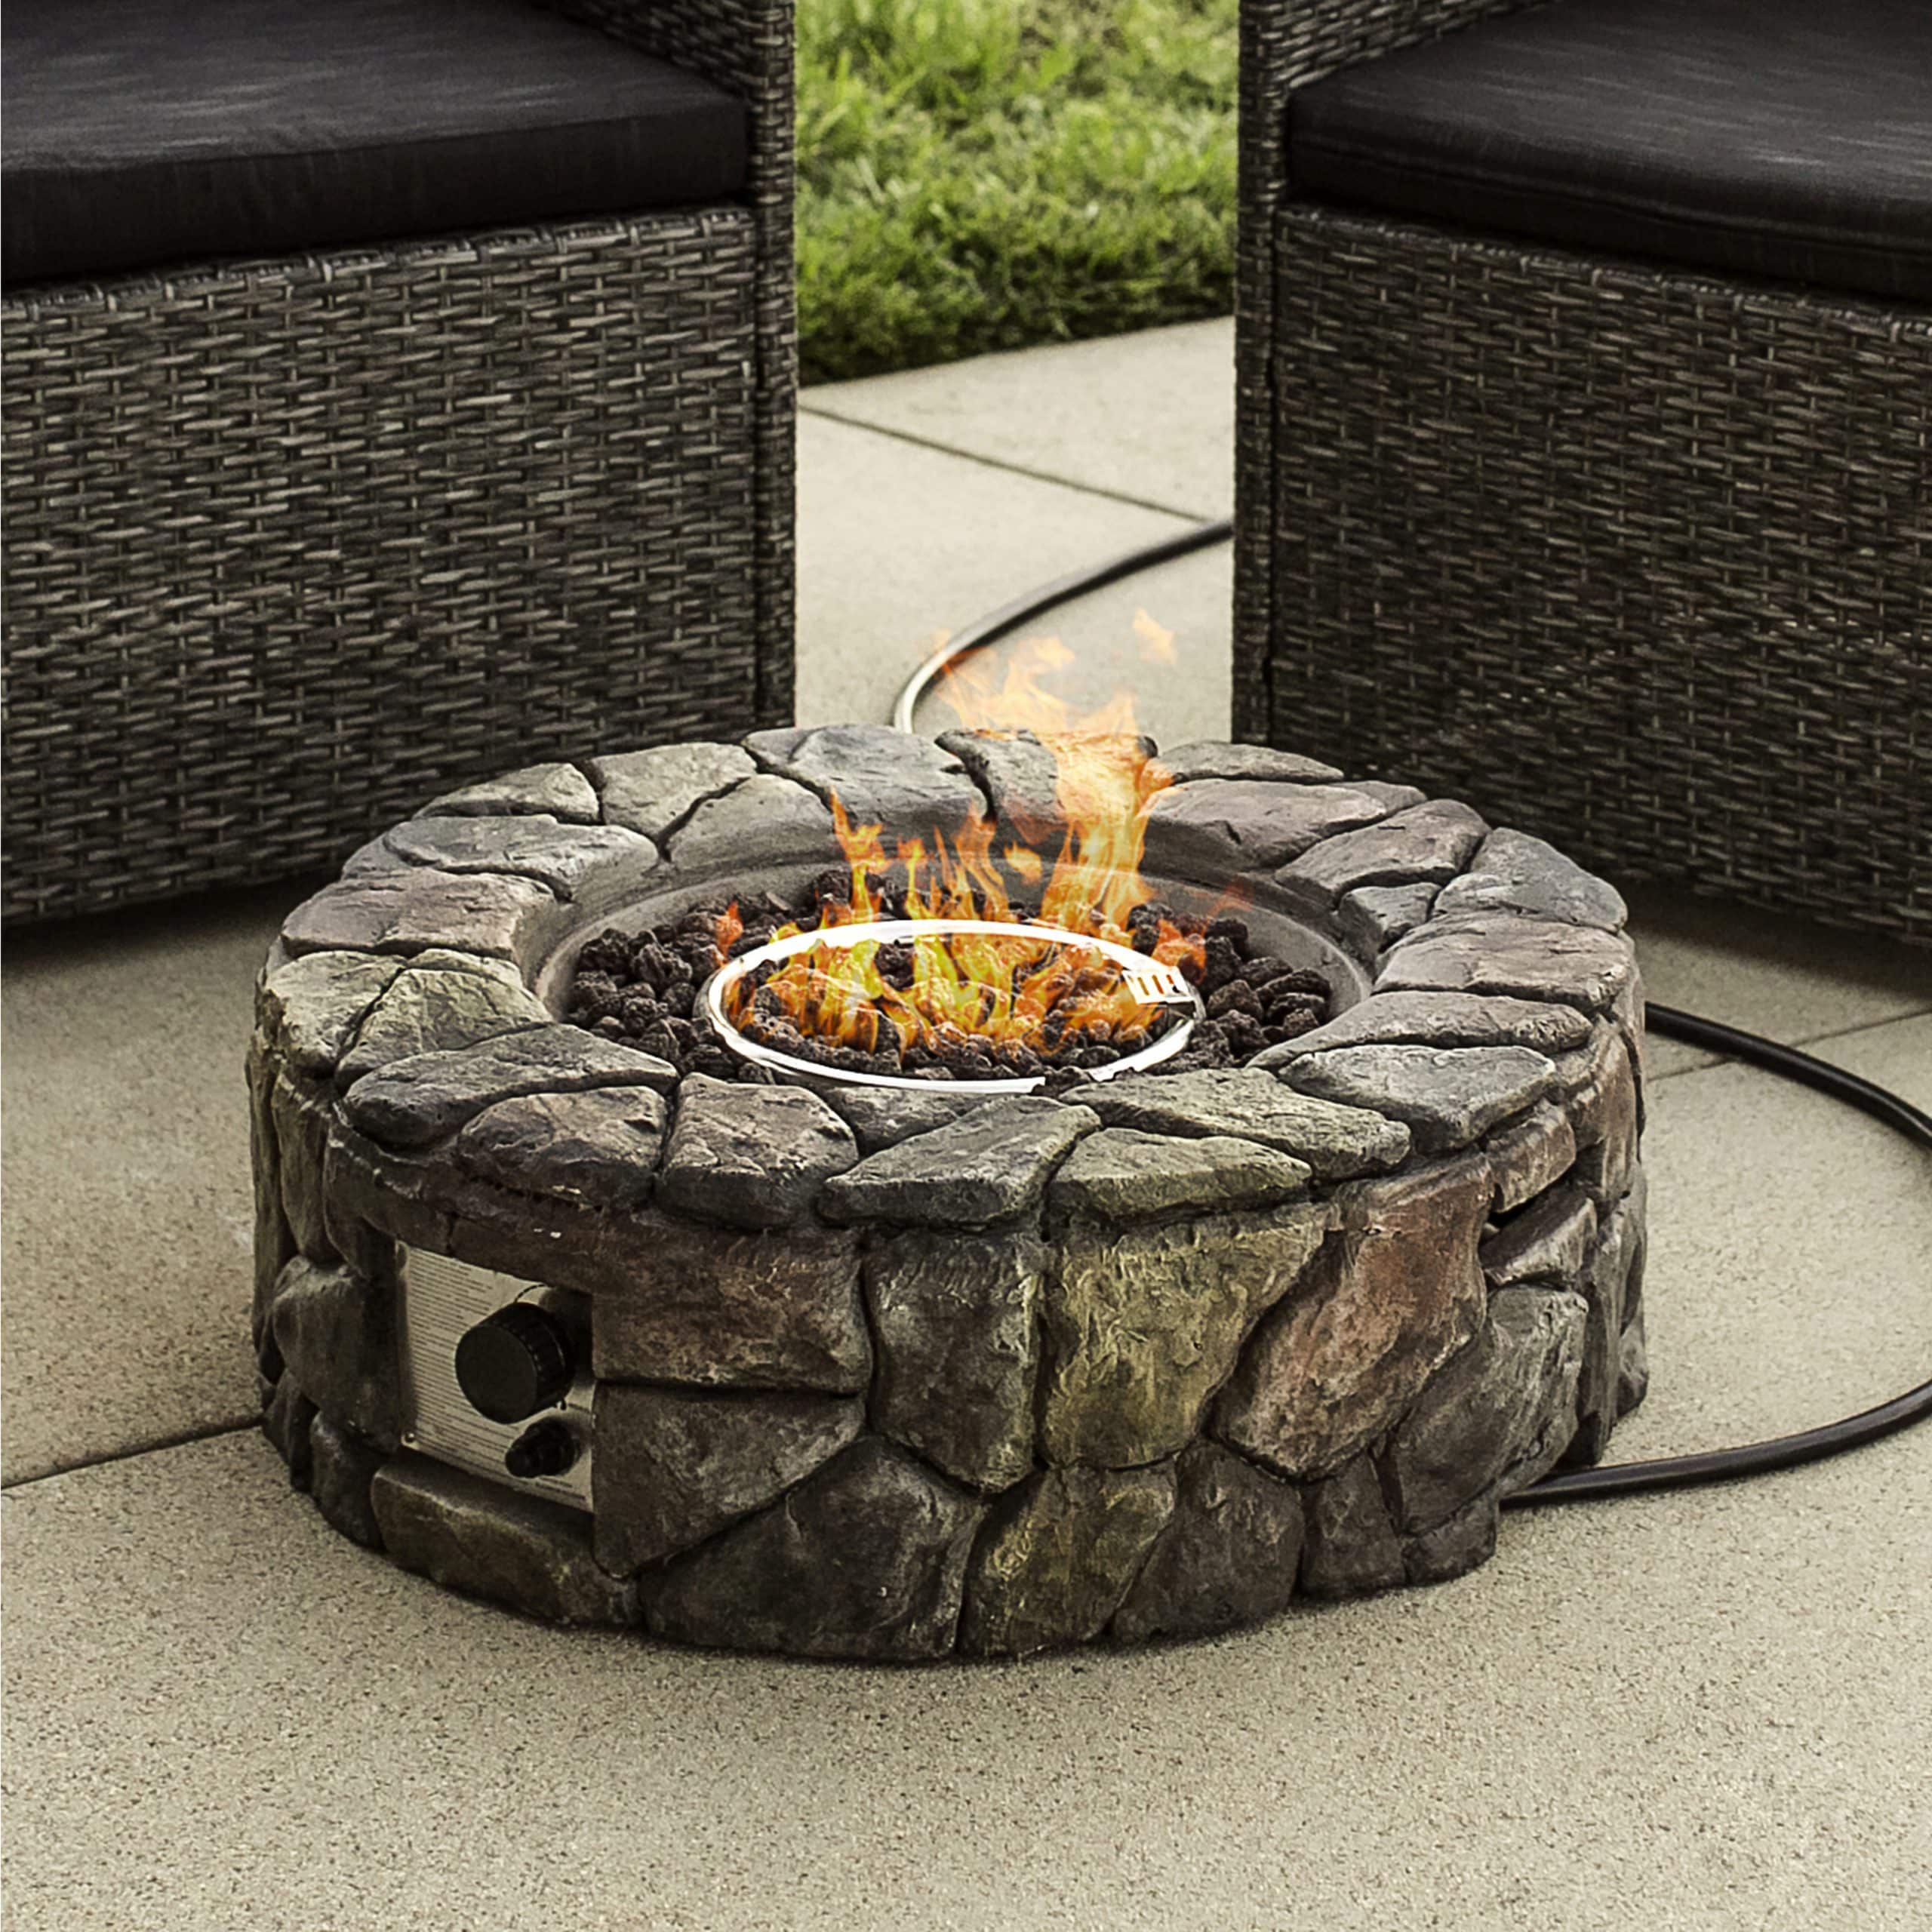 Best Choice Products Home Outdoor Patio Natural Stone Gas Fire Pit for ...